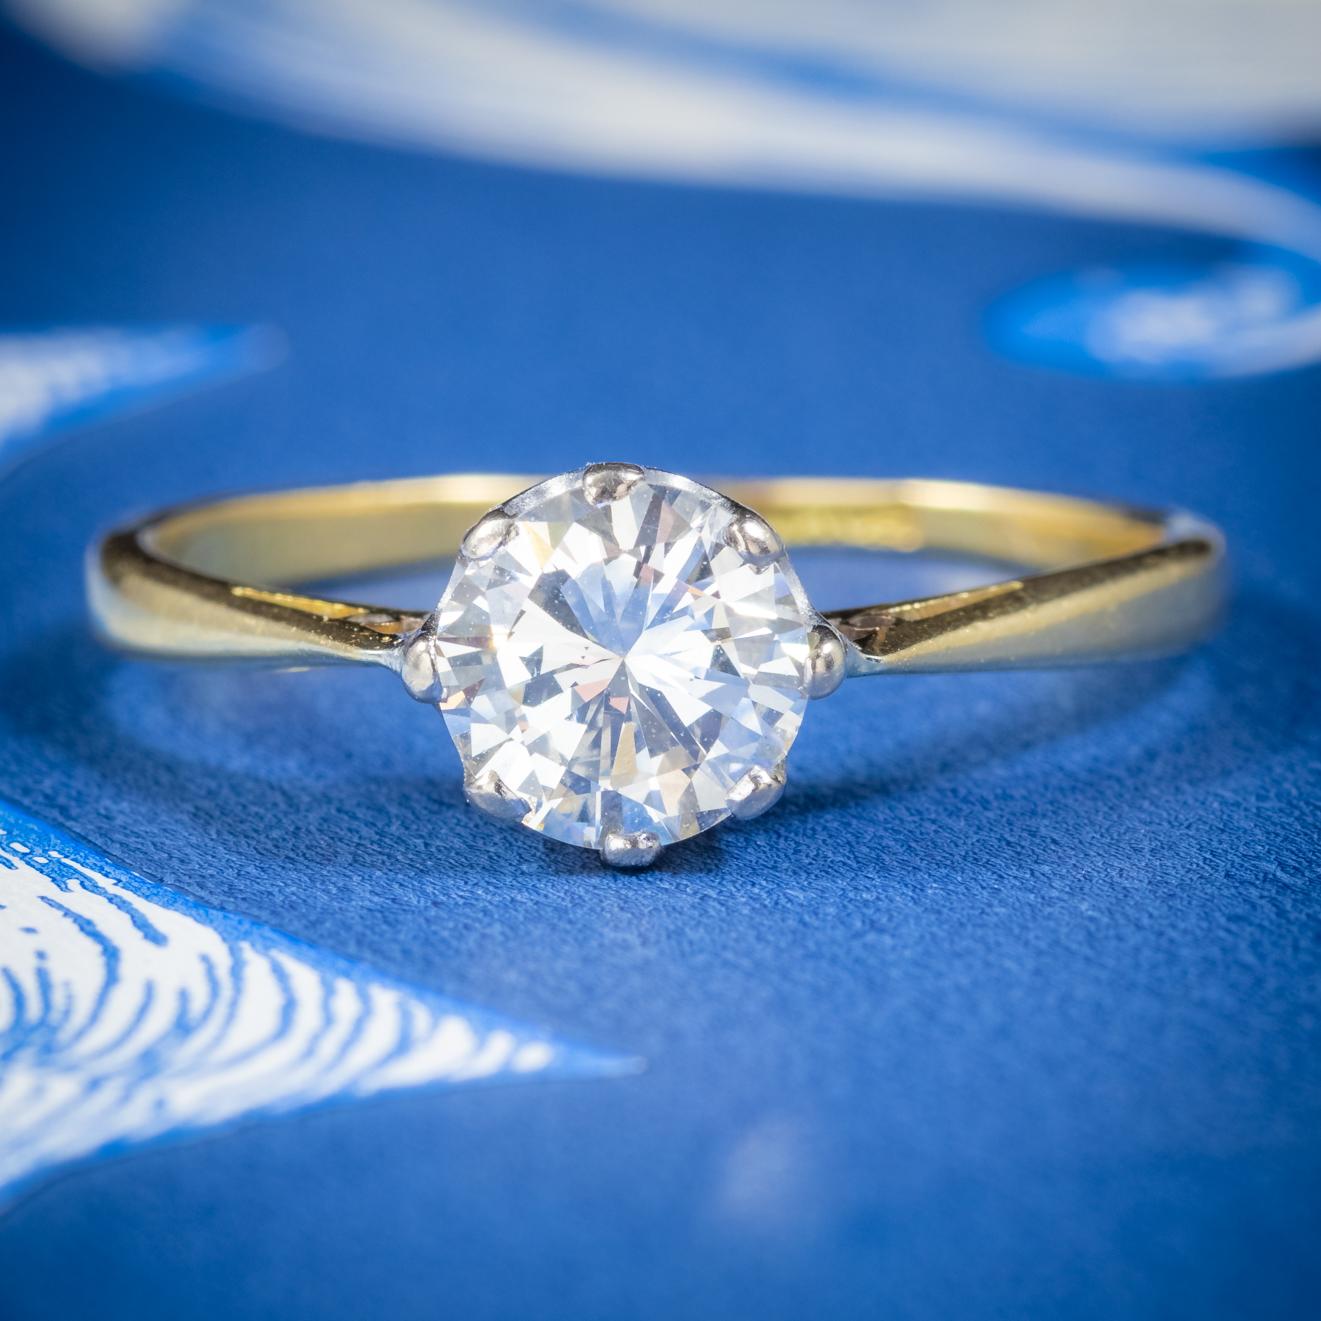 A stunning antique Victorian Solitaire ring crowned with a beautiful 0.97ct old brilliant cut Diamond which has been certified as a VS1 clarity – L colour stone and sparkles beautifully in the light.  

The solitaire is claw set in an 18ct White